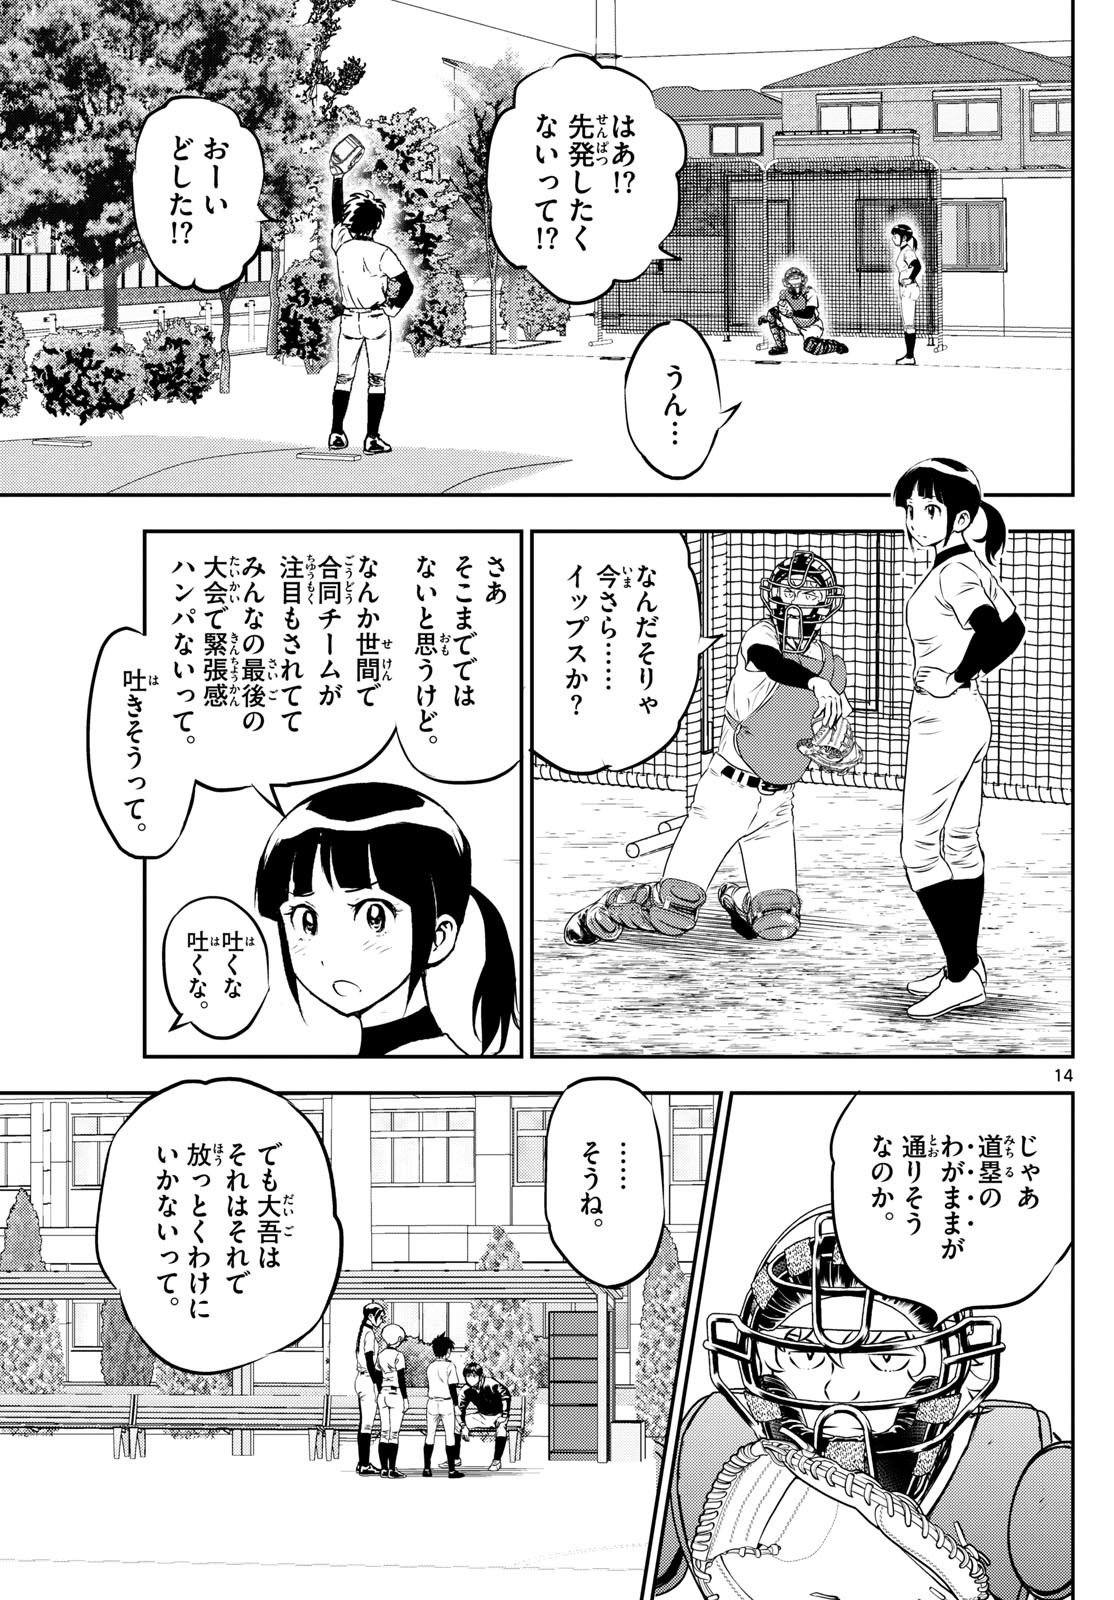 Major 2nd - メジャーセカンド - Chapter 279 - Page 15